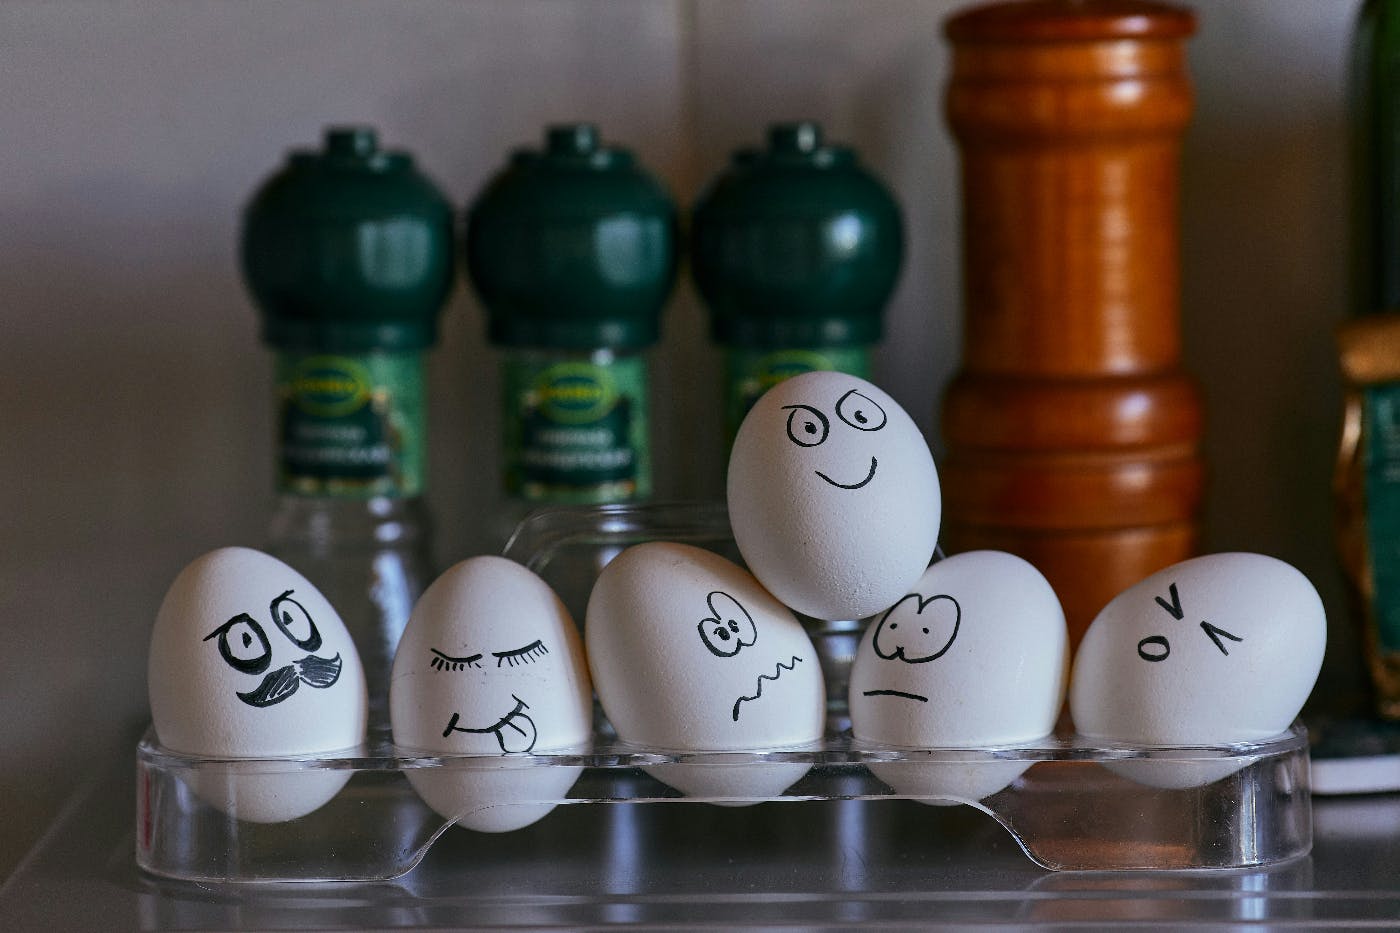 White eggs with faces drawn on with a sharpie in a cradle